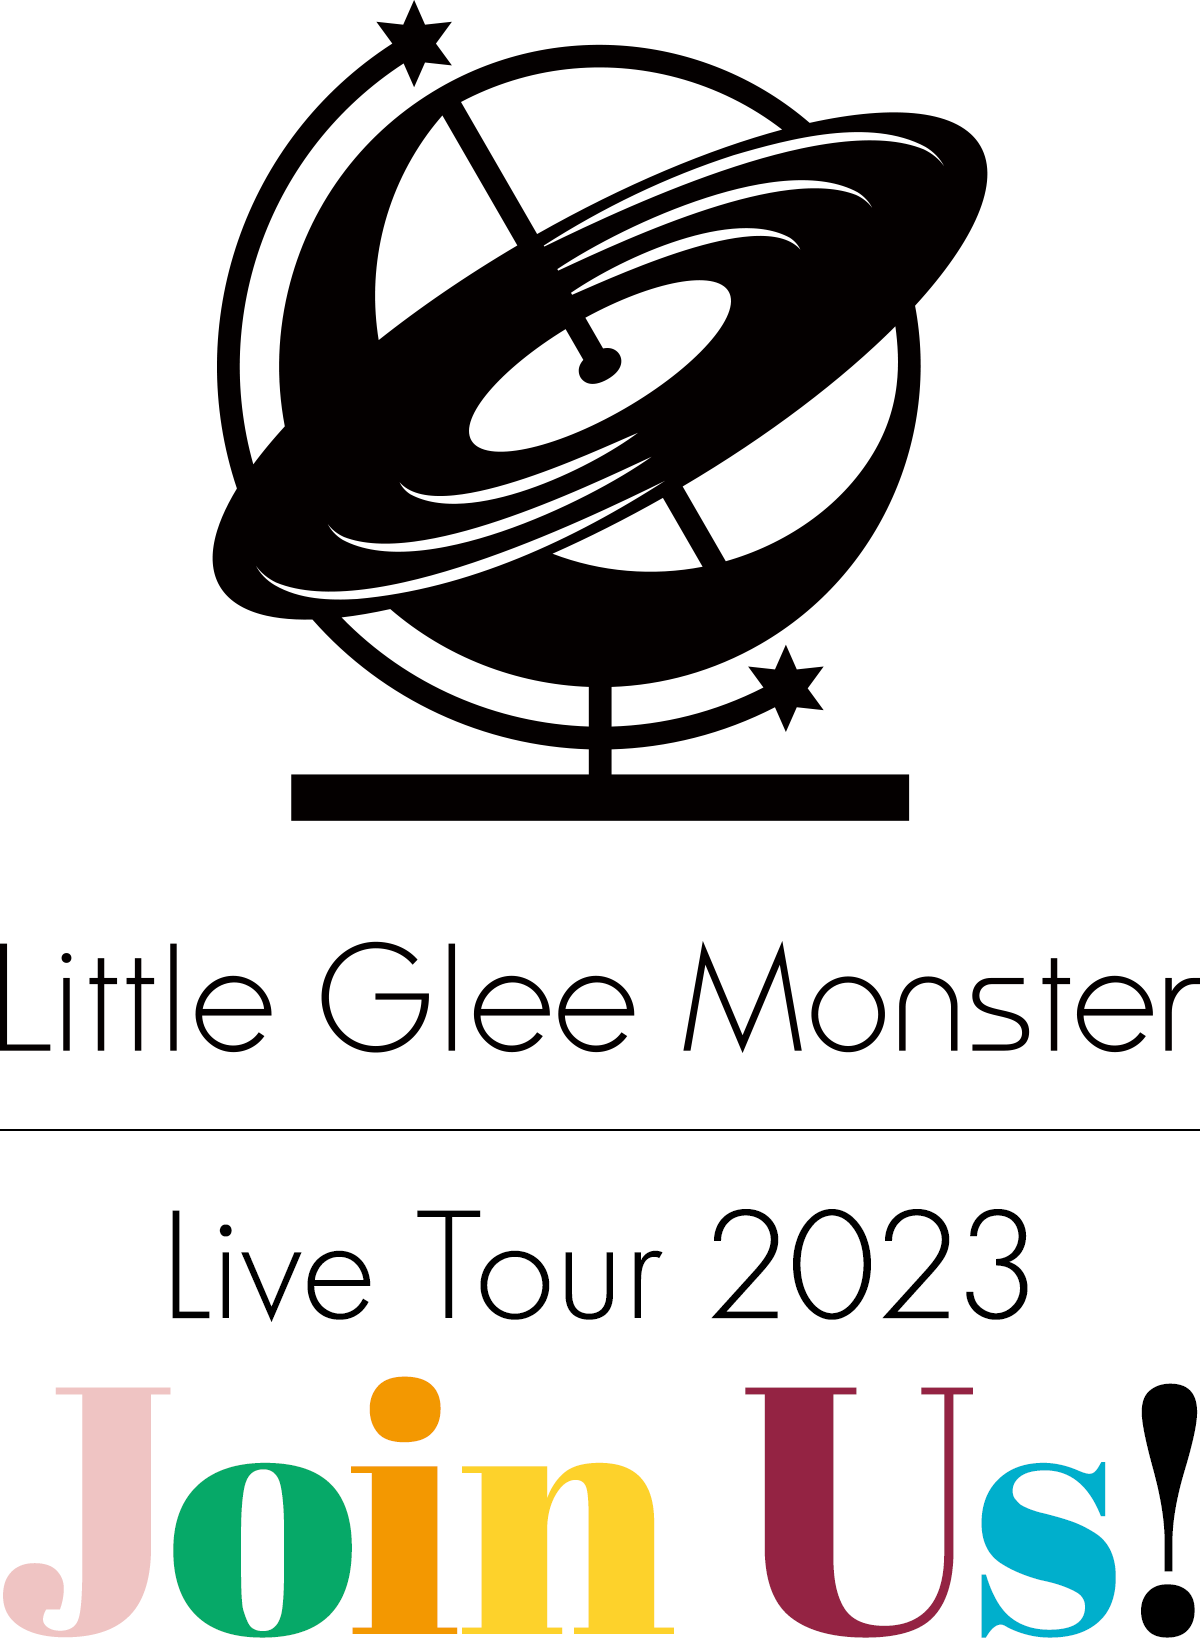 Little Glee Monster Live Tour 2023 Join Us! Special Site